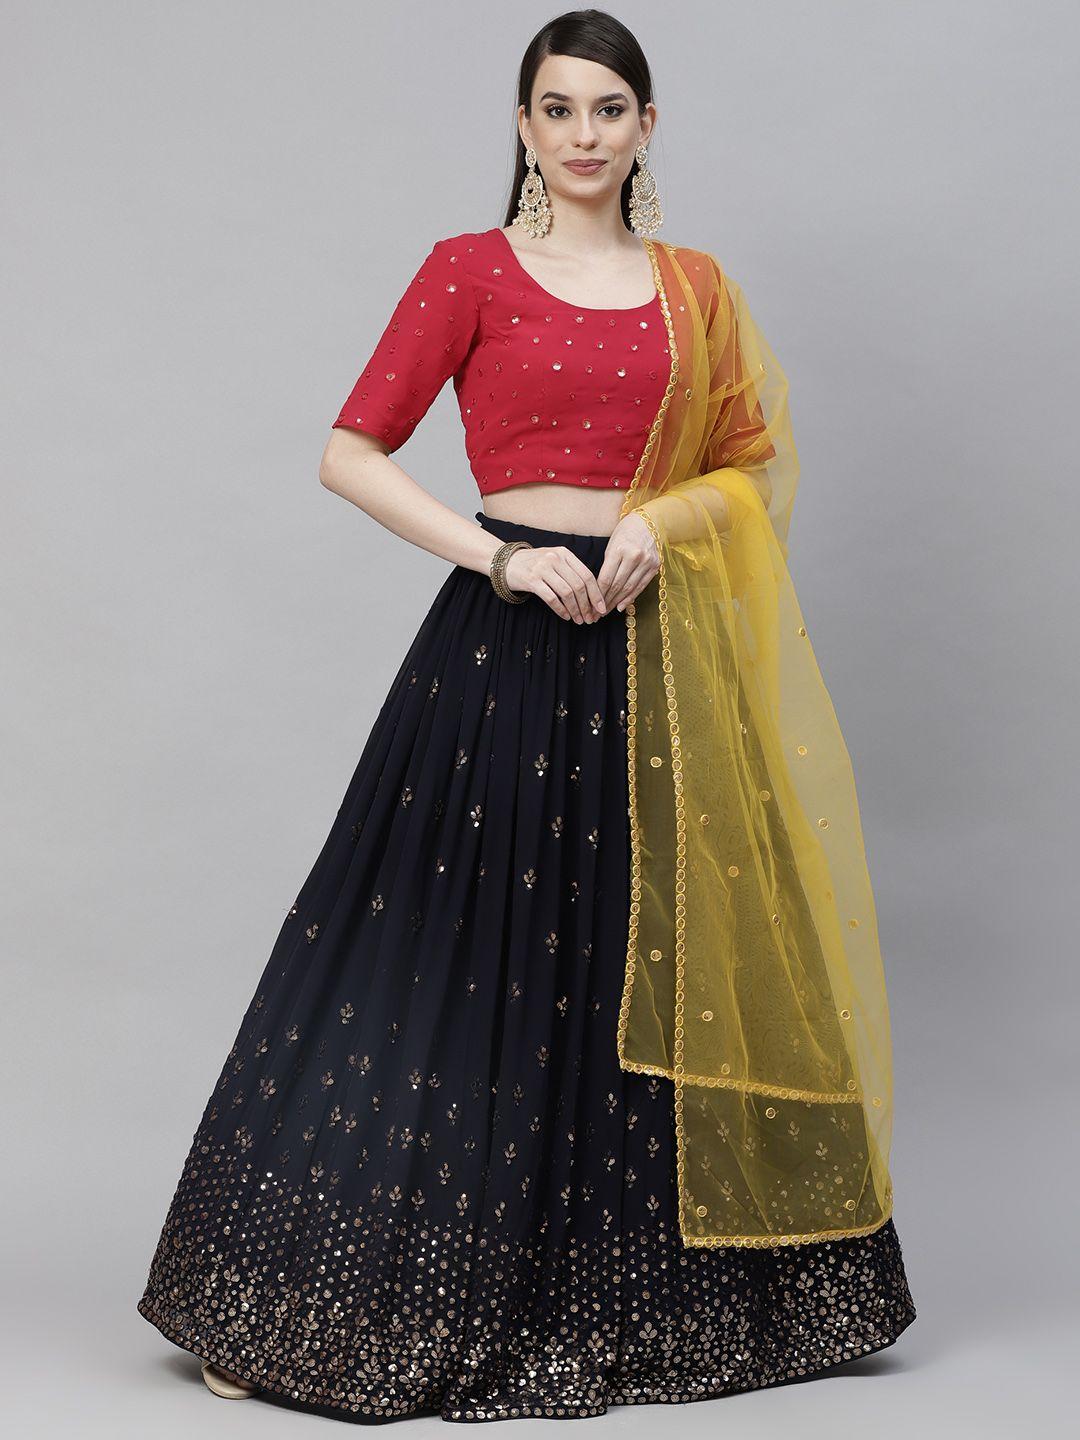 shubhkala-navy-blue-&-red-embroidered-sequinned-semi-stitched-lehenga-&-unstitched-blouse-with-dupatta